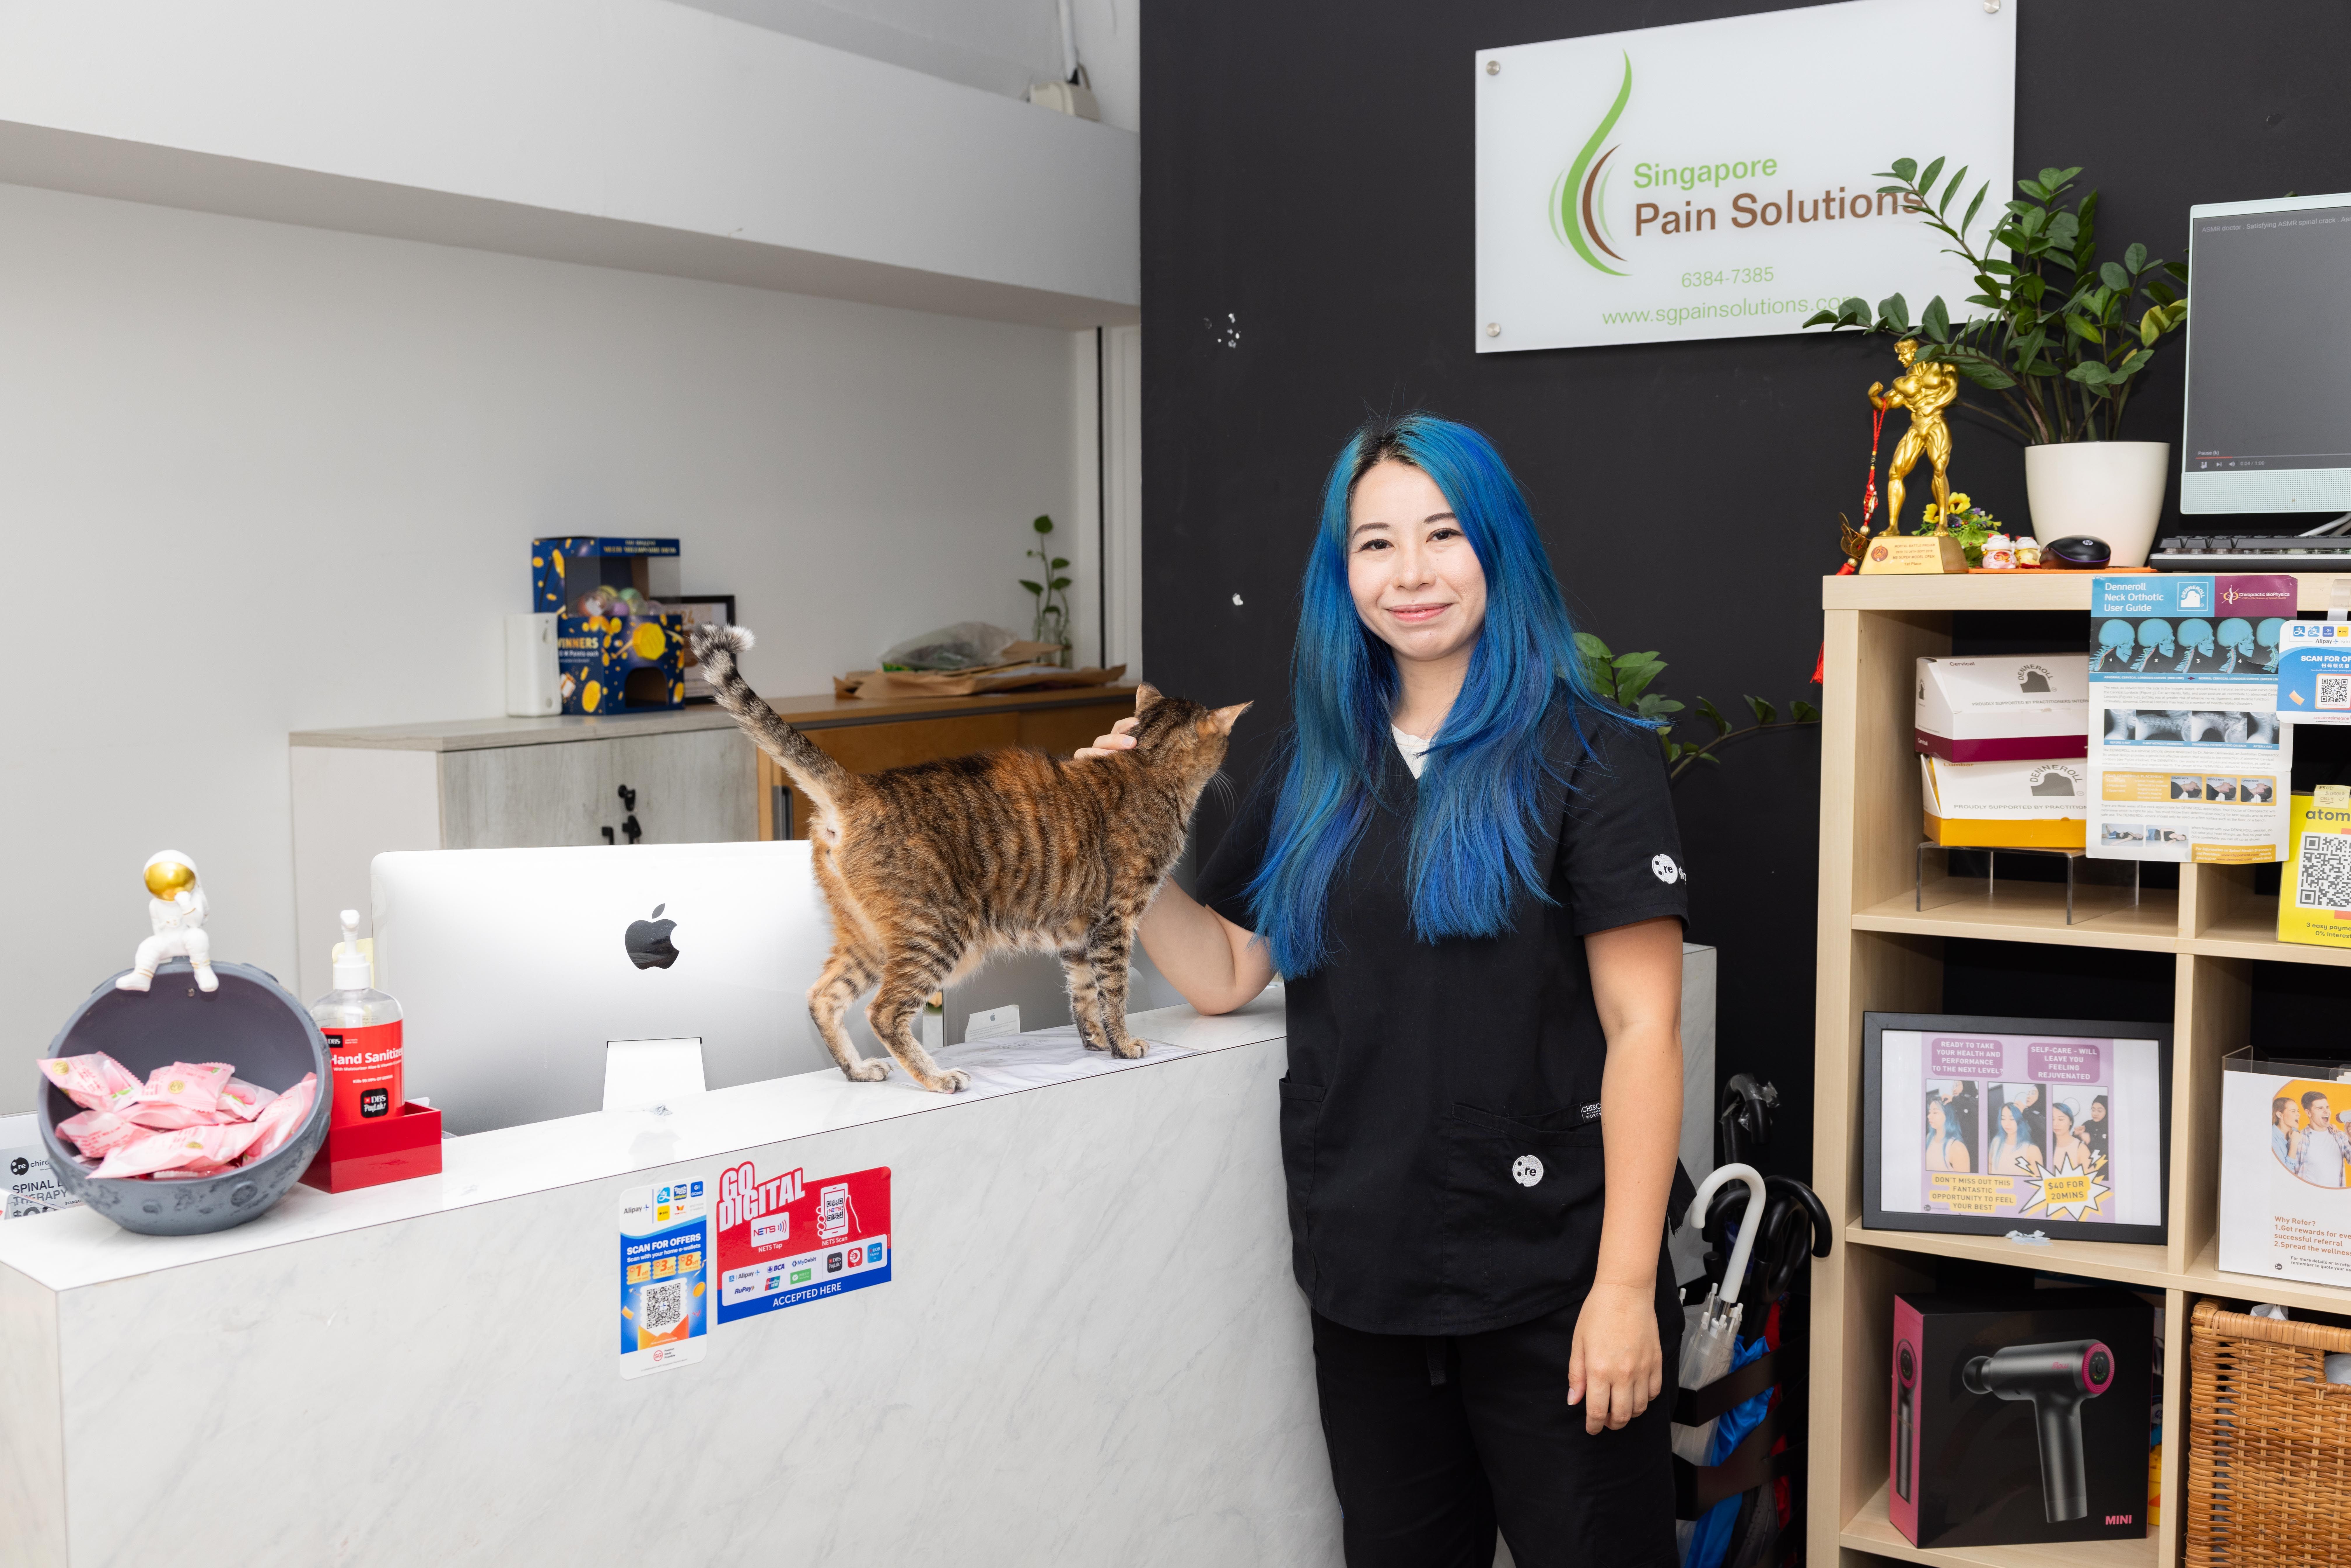 Dr Jenny Li stands at the reception desk with a cat.